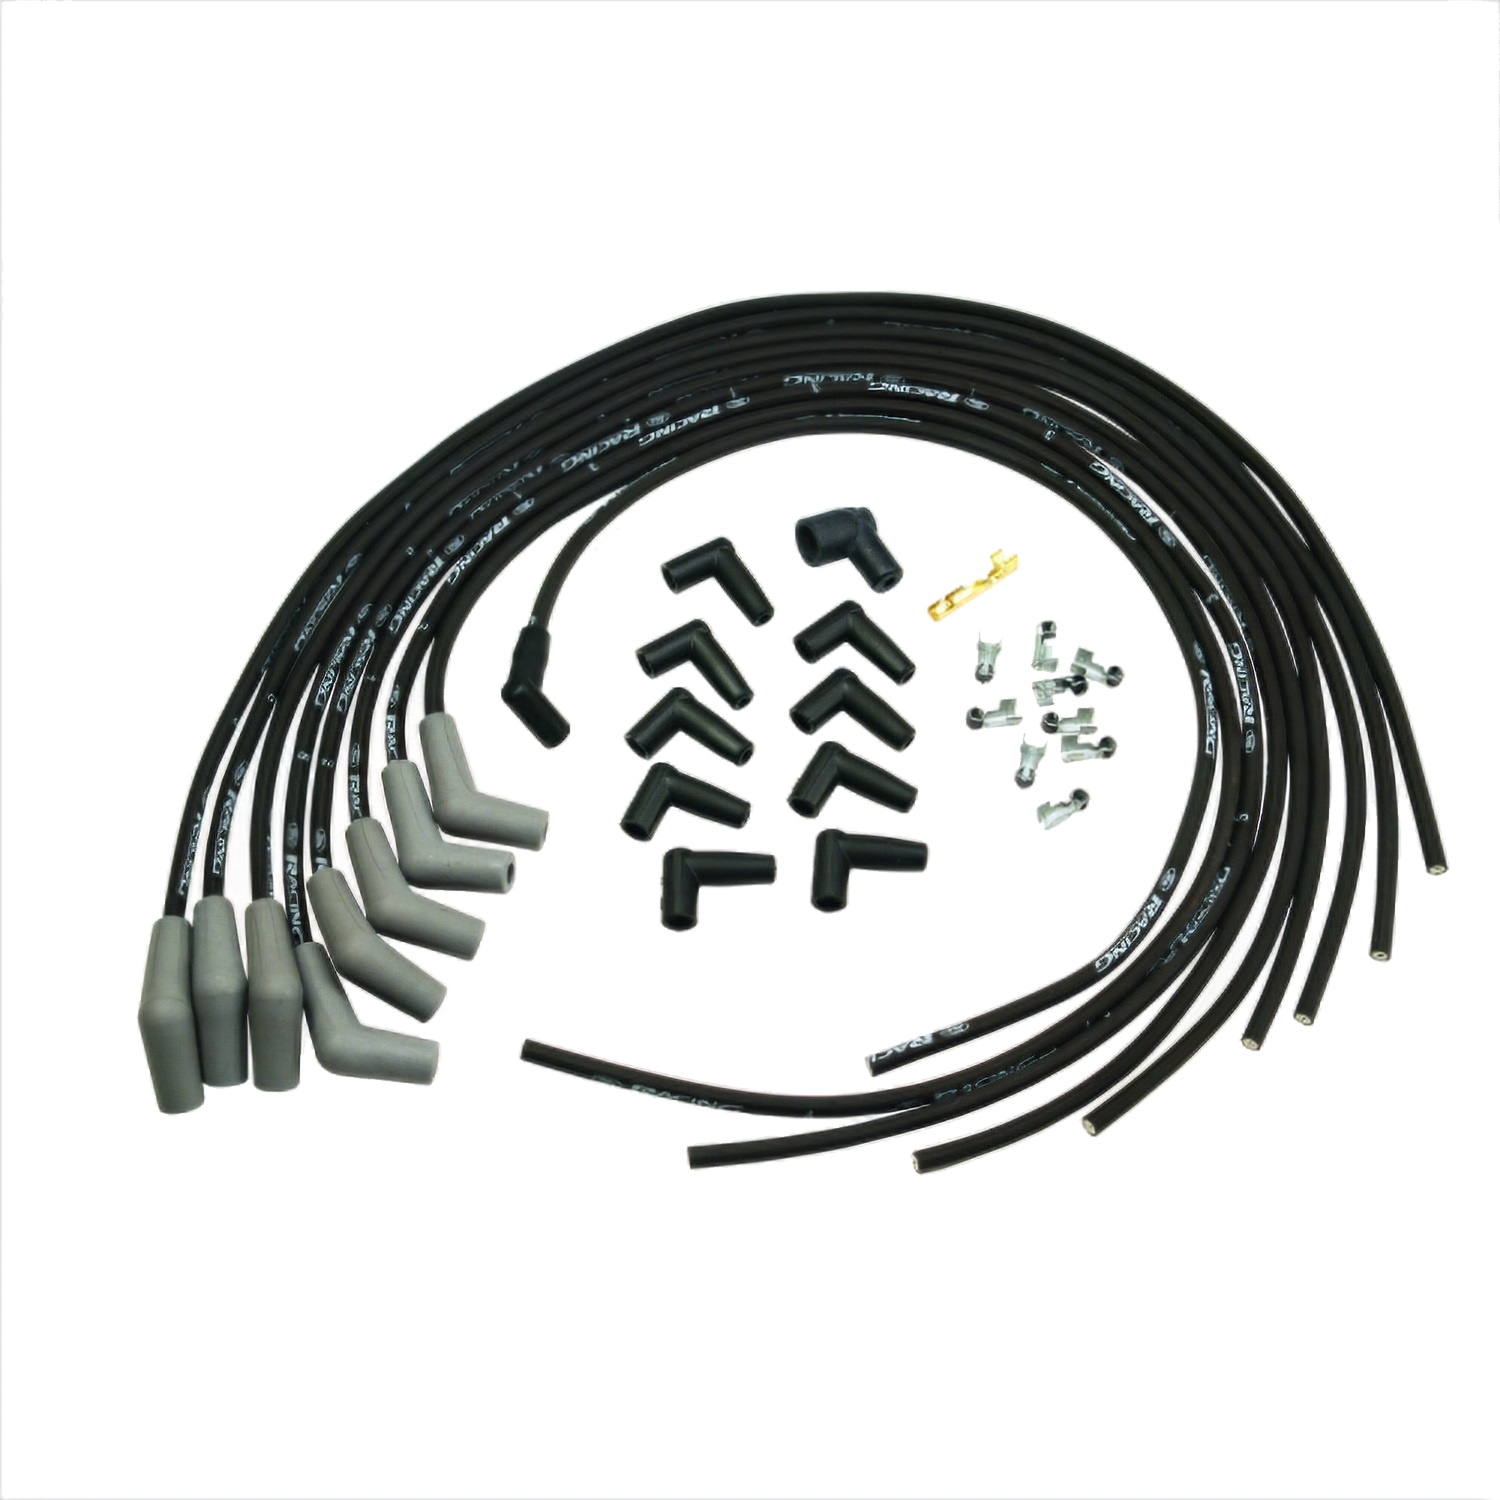 Ford Racing Ford Racing M-12259-M302 9mm Ignition Wire Set